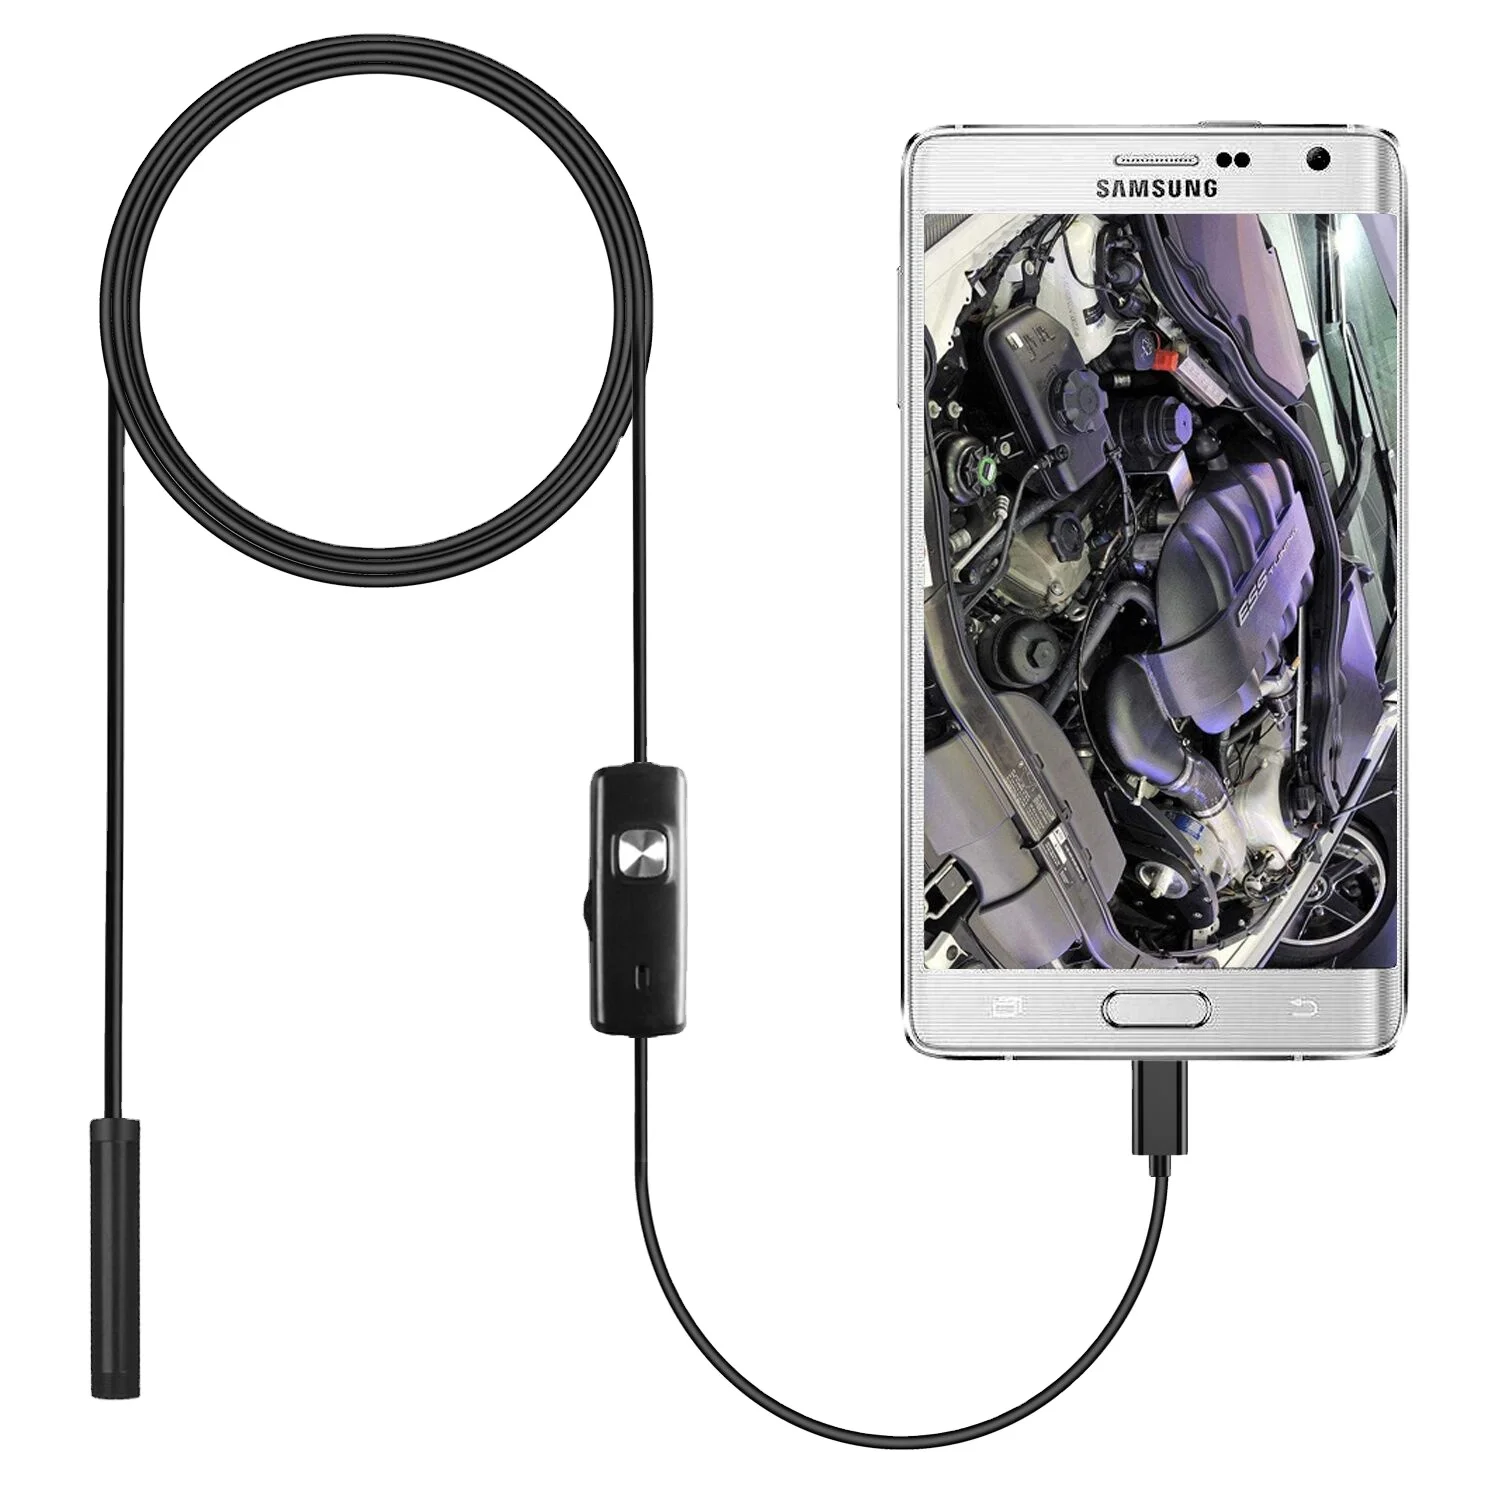 medley Manchuriet kommentator Wholesale Used car vehicle tools waterproof 7mm inspection Android borescope  Camera driver usb endoscope camera Android Endoscope From m.alibaba.com